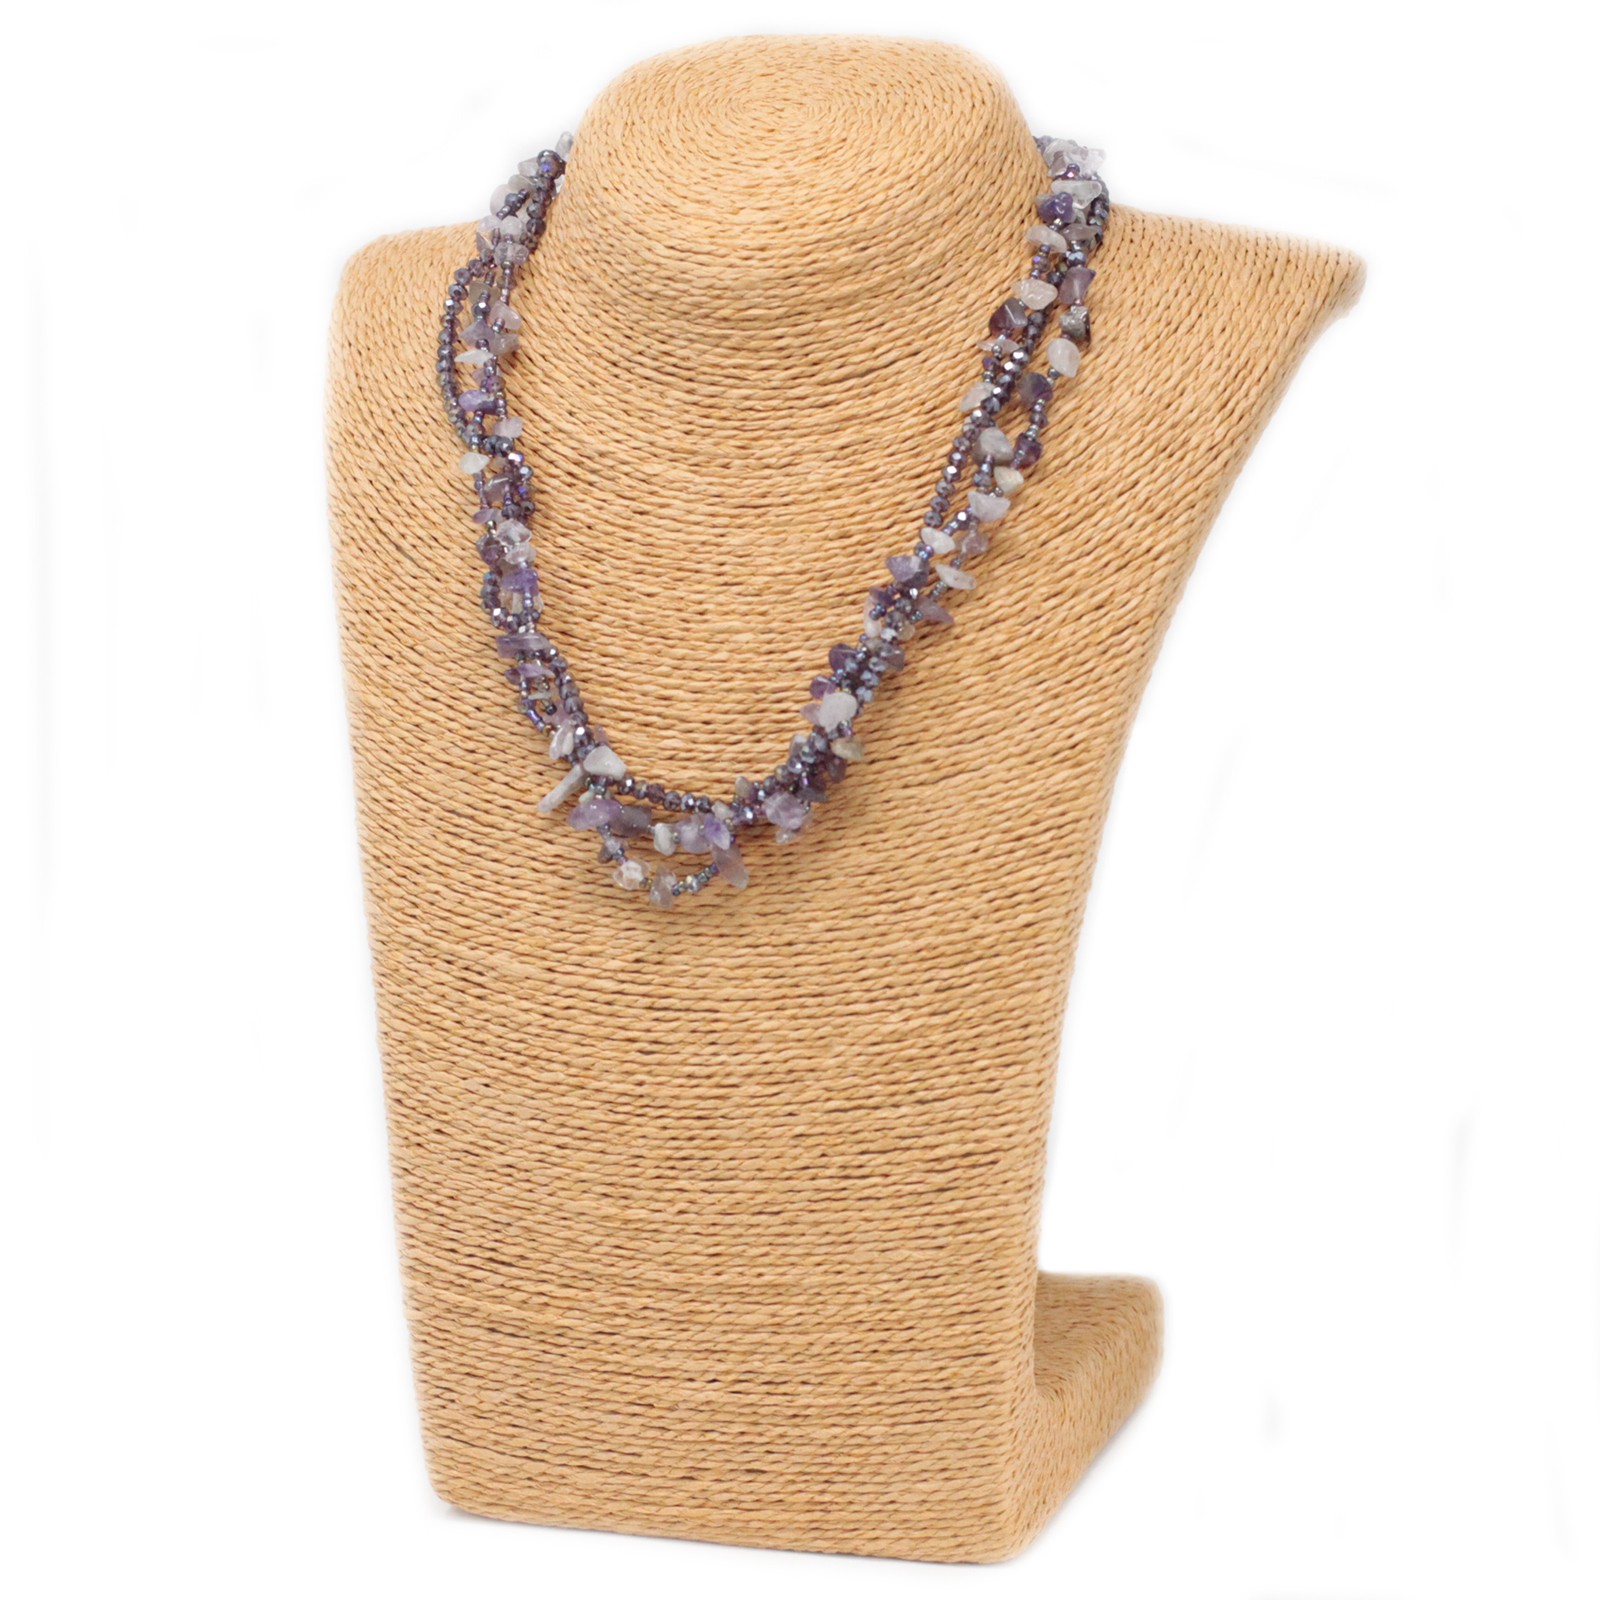 Chipstone & Bead Necklace -Amethyst